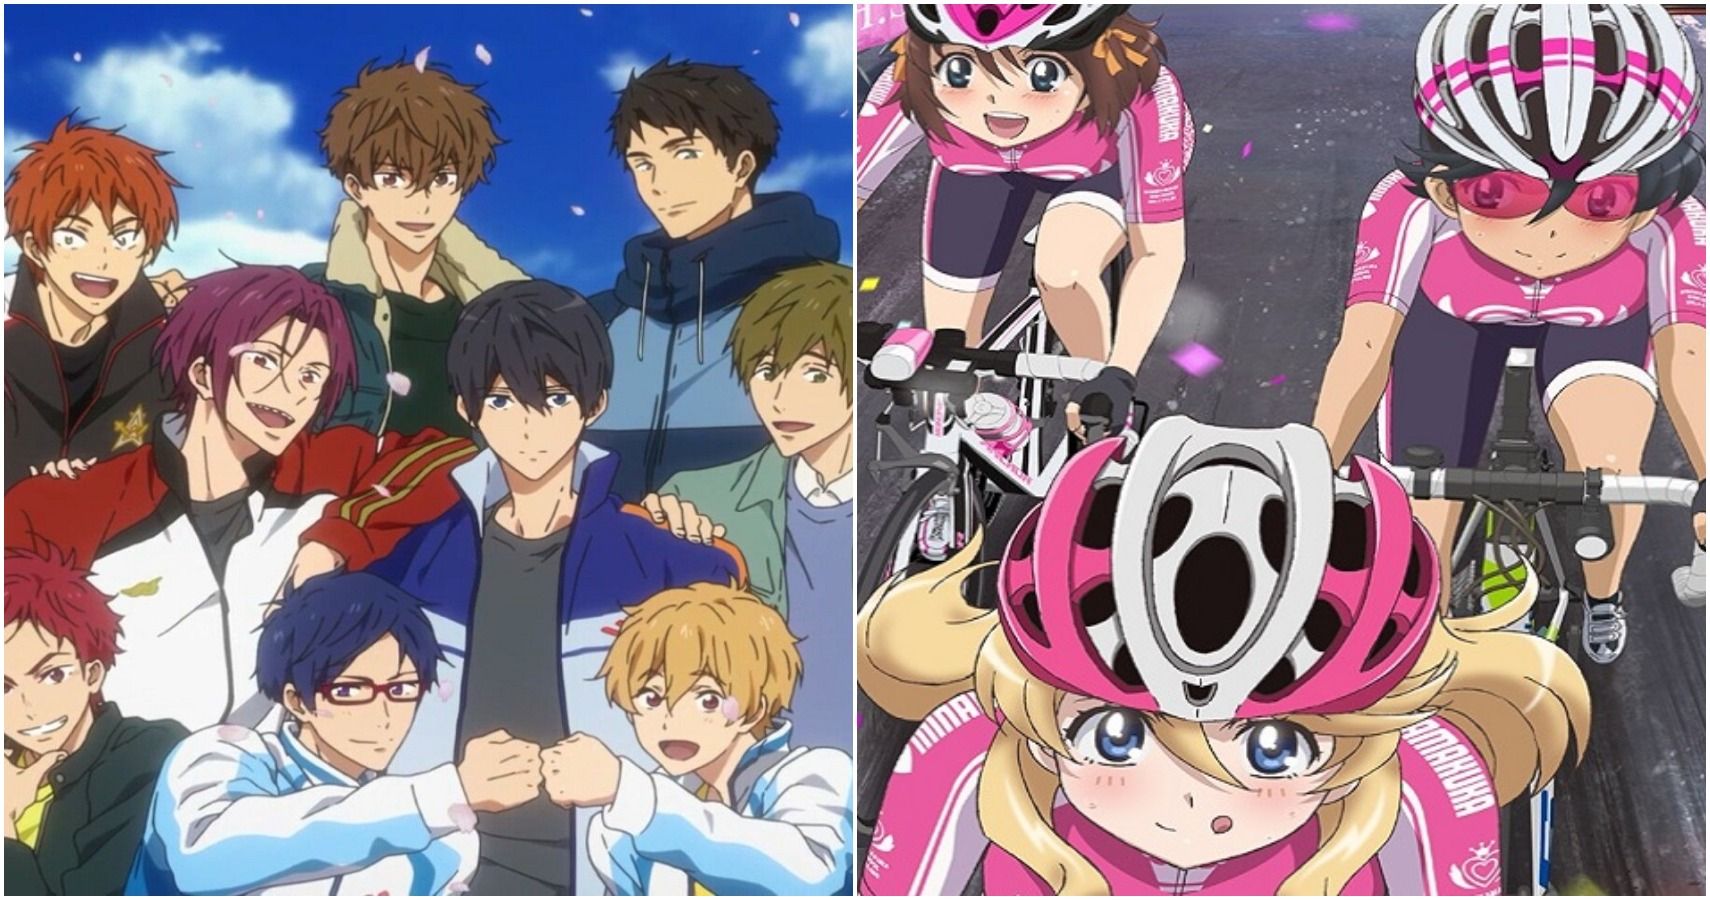 10 Best Sports Anime Of All Time, According To IMDb